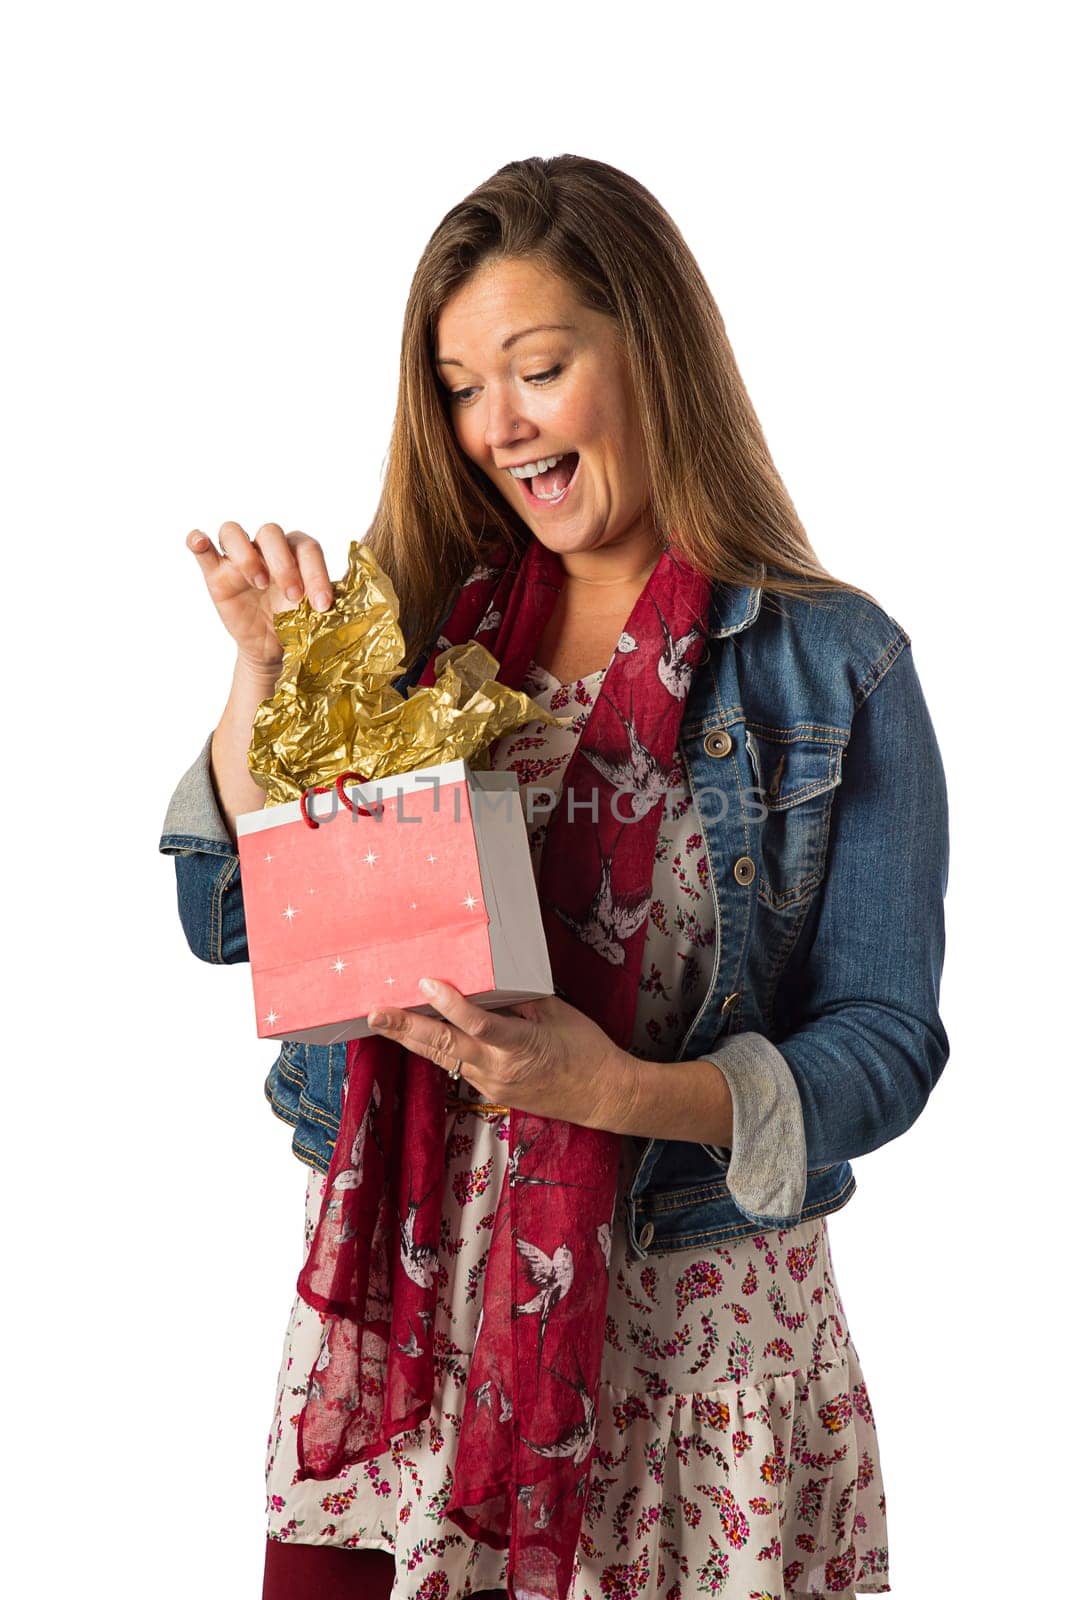 Forty year old woman opening gift bag by mypstudio